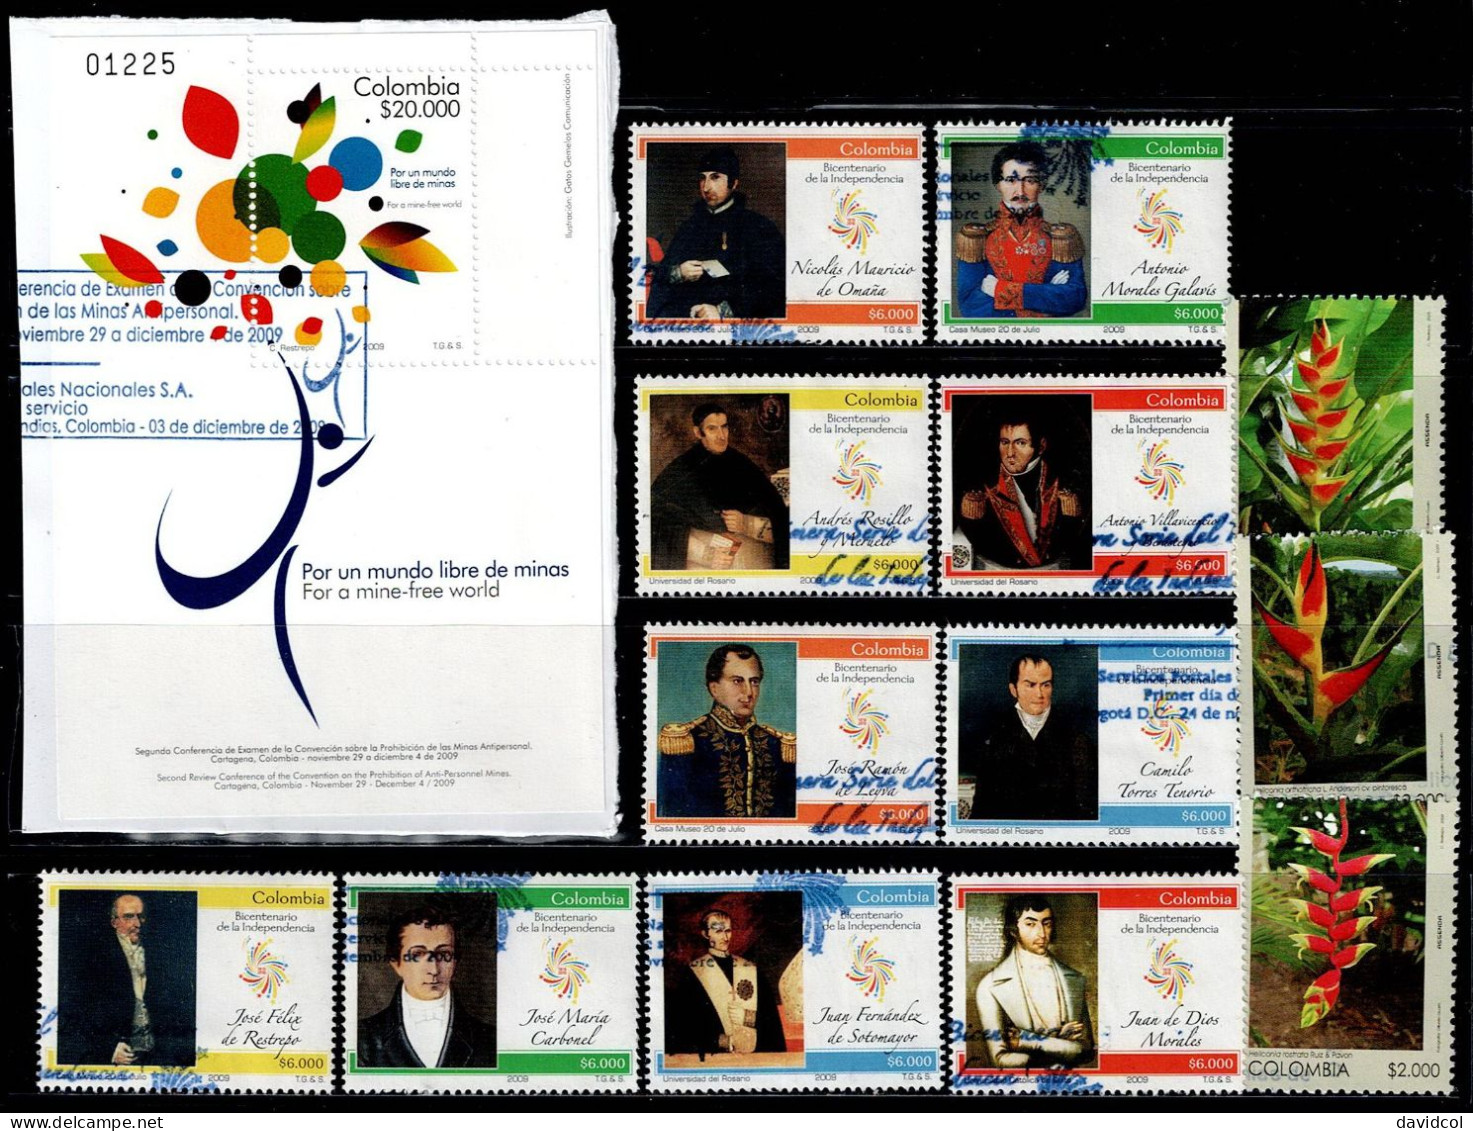 0161AB-COLOMBIA-2009-HCV - USED POSTAL WITH SCARCES-2 COMPLETE SETS - Colombia